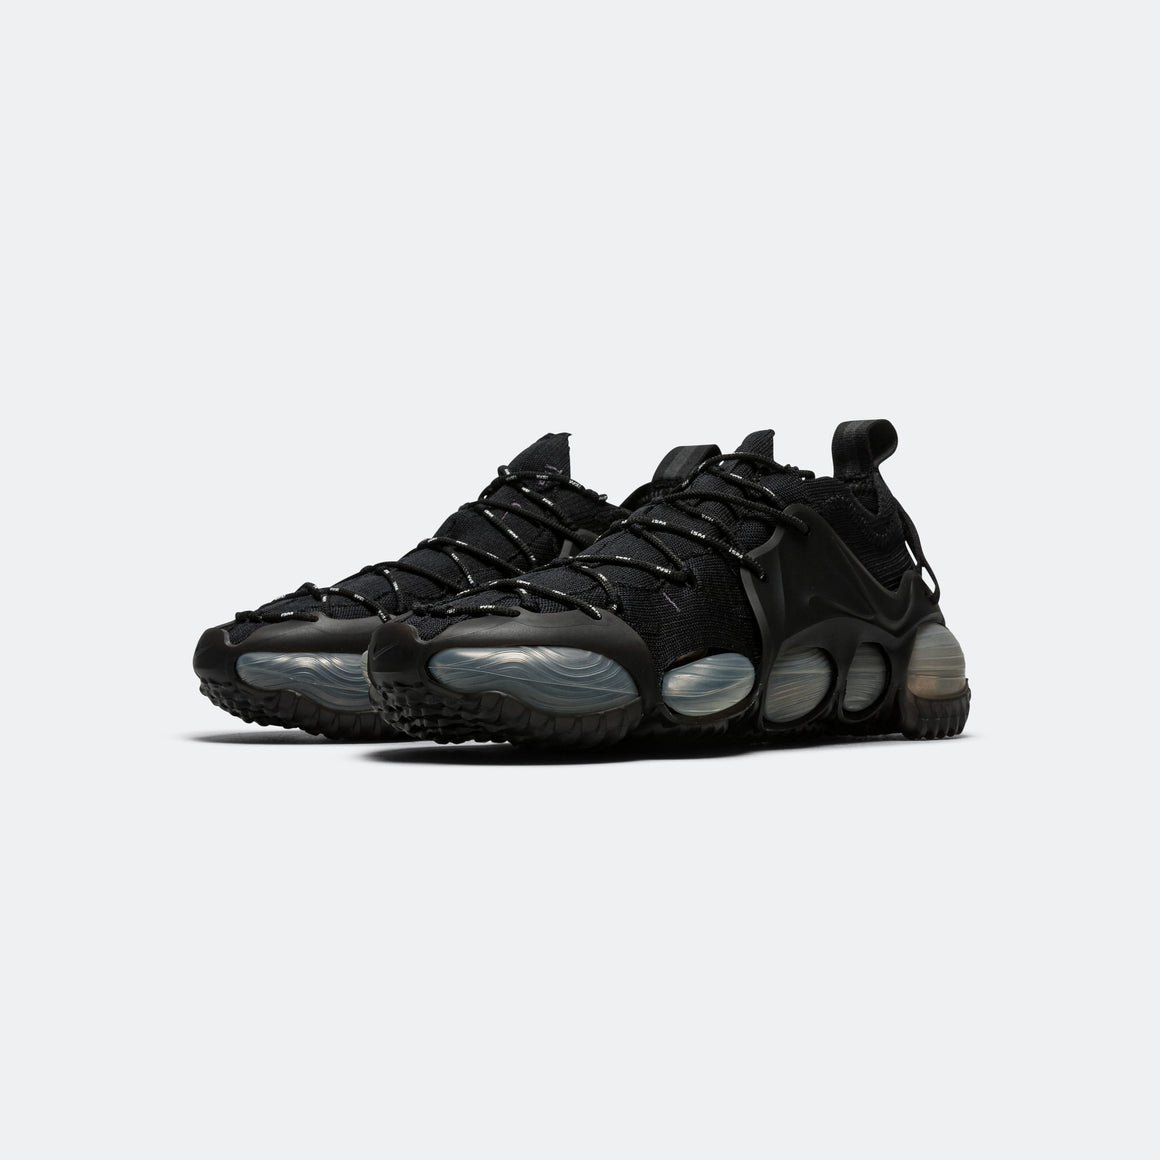 Nike - ISPA Link Axis - Black/Anthracite - UP THERE